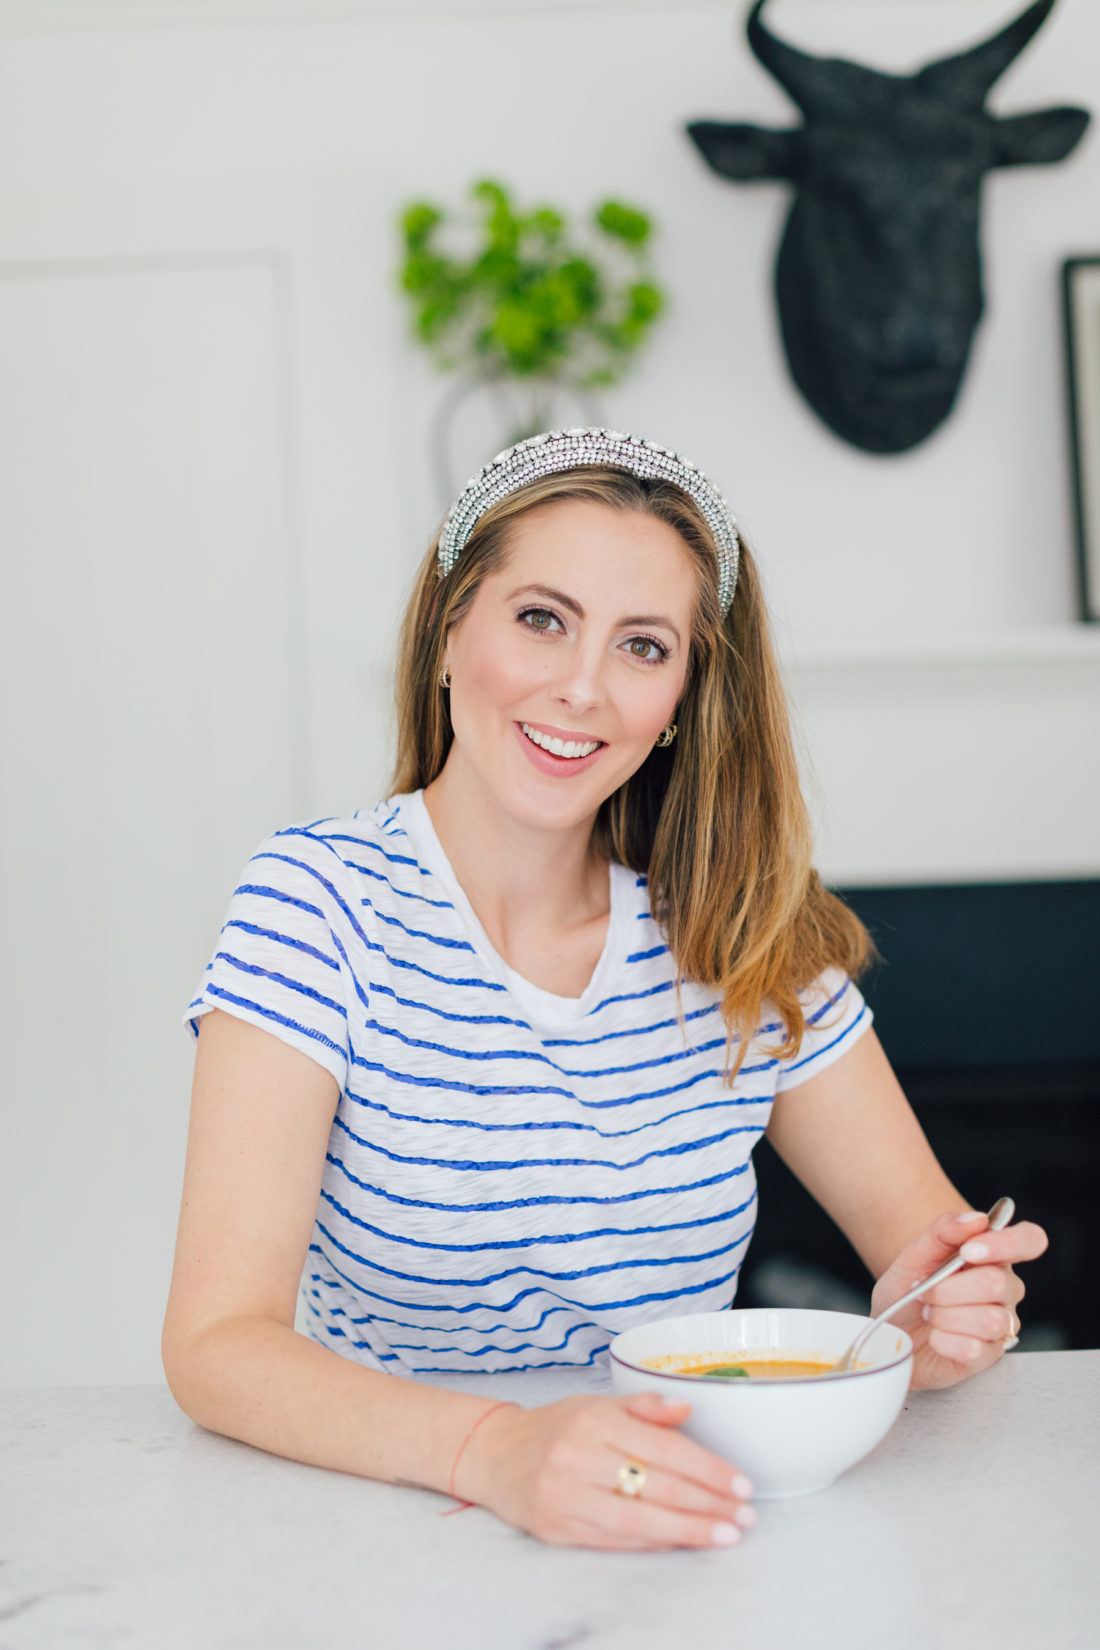 Eva Amurri Martino enjoys her Heirloom Tomato Soup With Grilled Cheese Croutons recipe